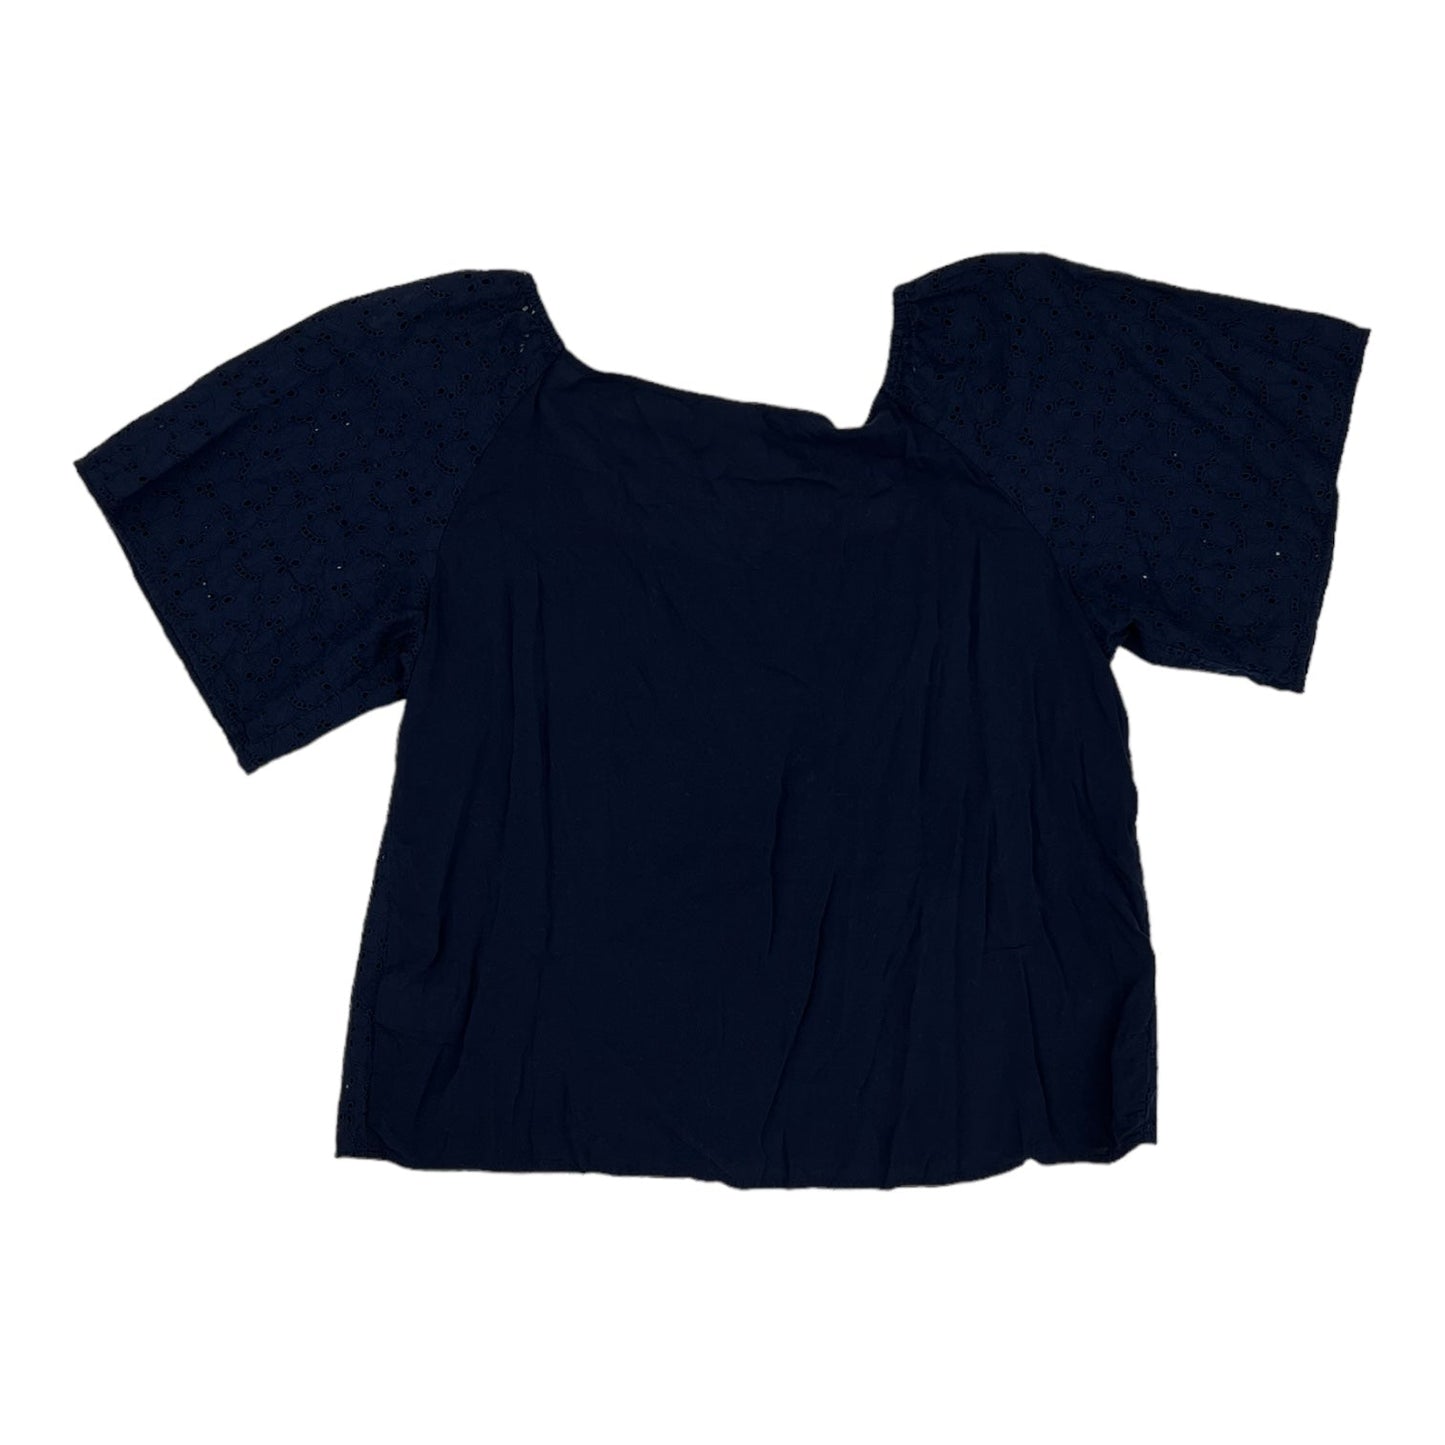 NAVY A NEW DAY TOP SS, Size XL